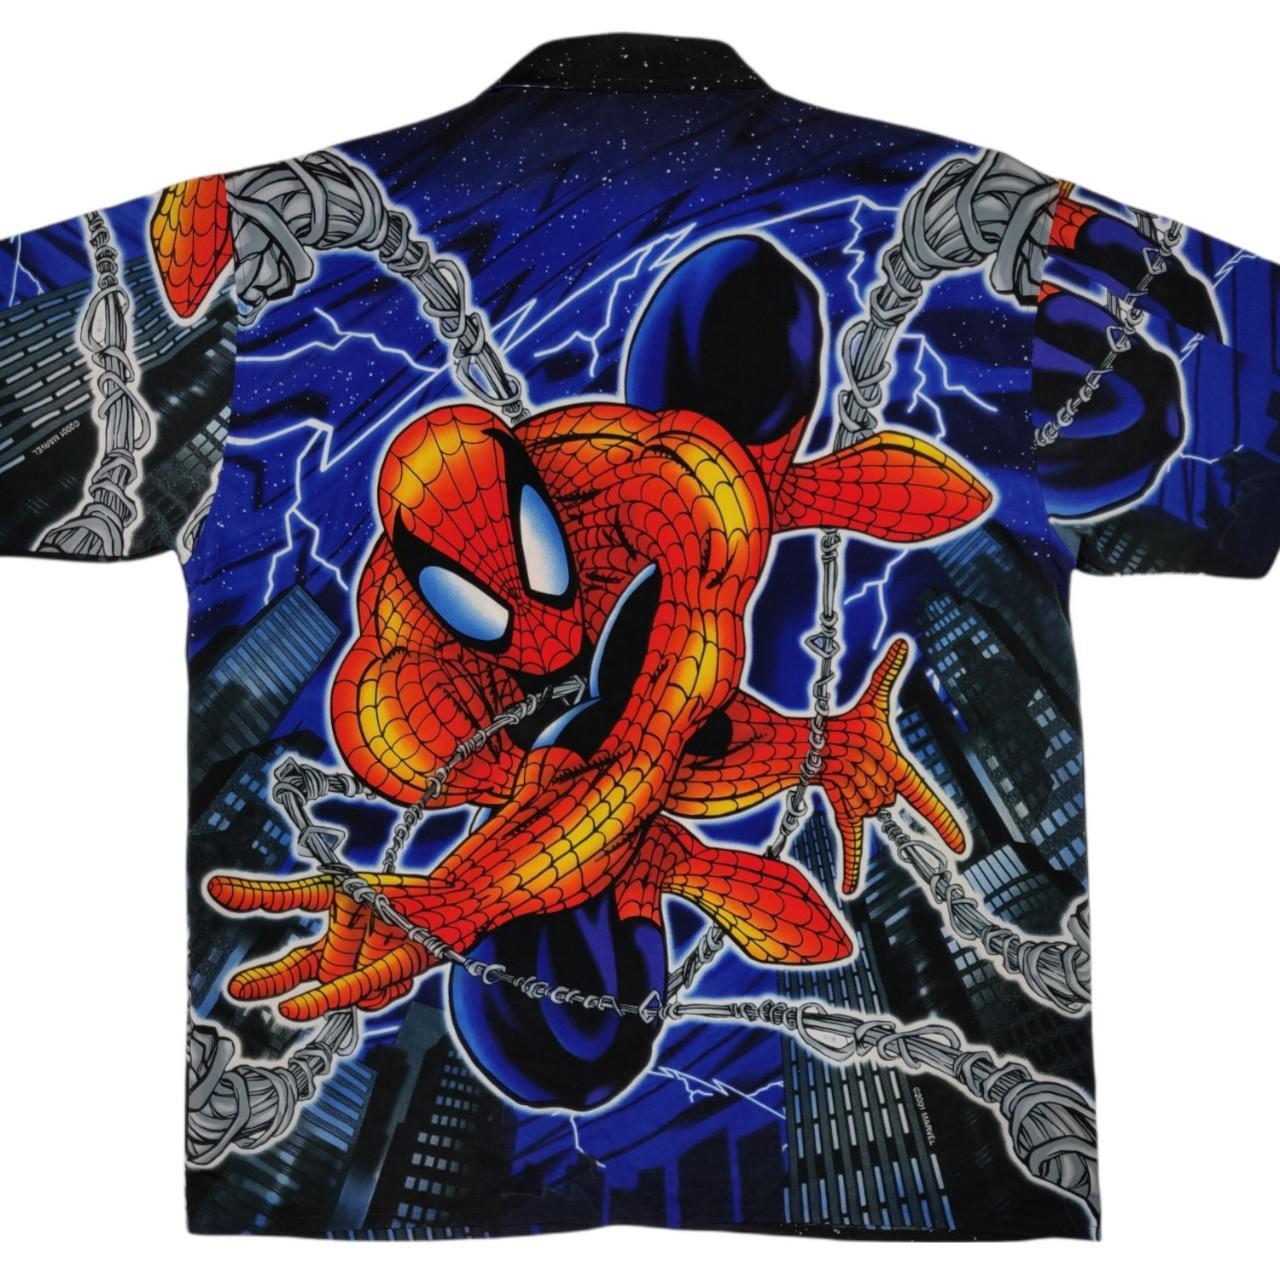 Product Image 2 - 2001 Spider-Man Button Up Shirt
Fits